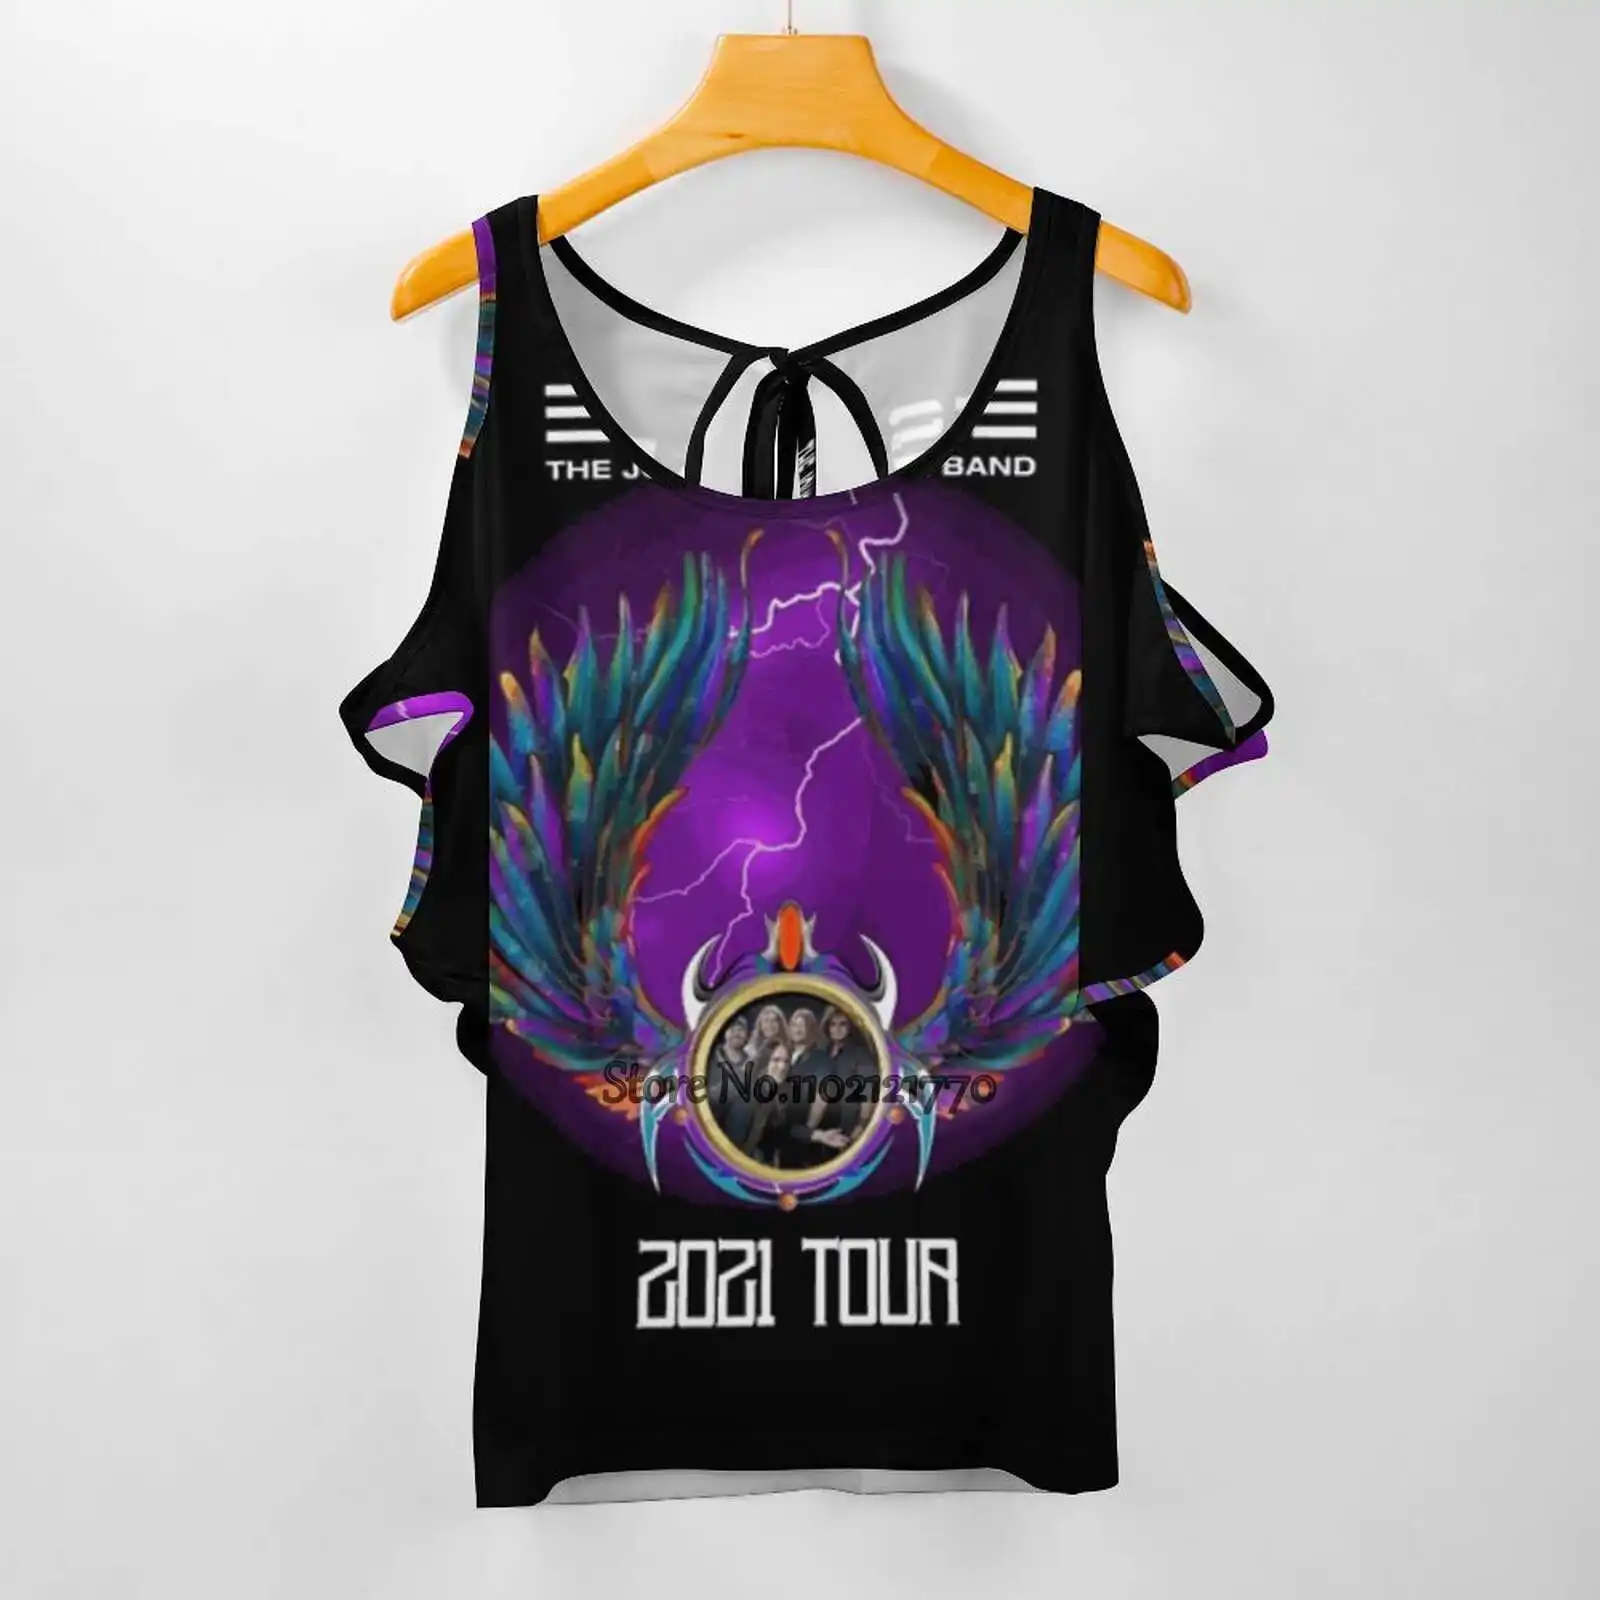 

Journey Escape Tribute Band Black Women'S Tops Tee Ladies Casual Sexy T-Shirt Back Lacing Clothing Journey Escape Tribute Band